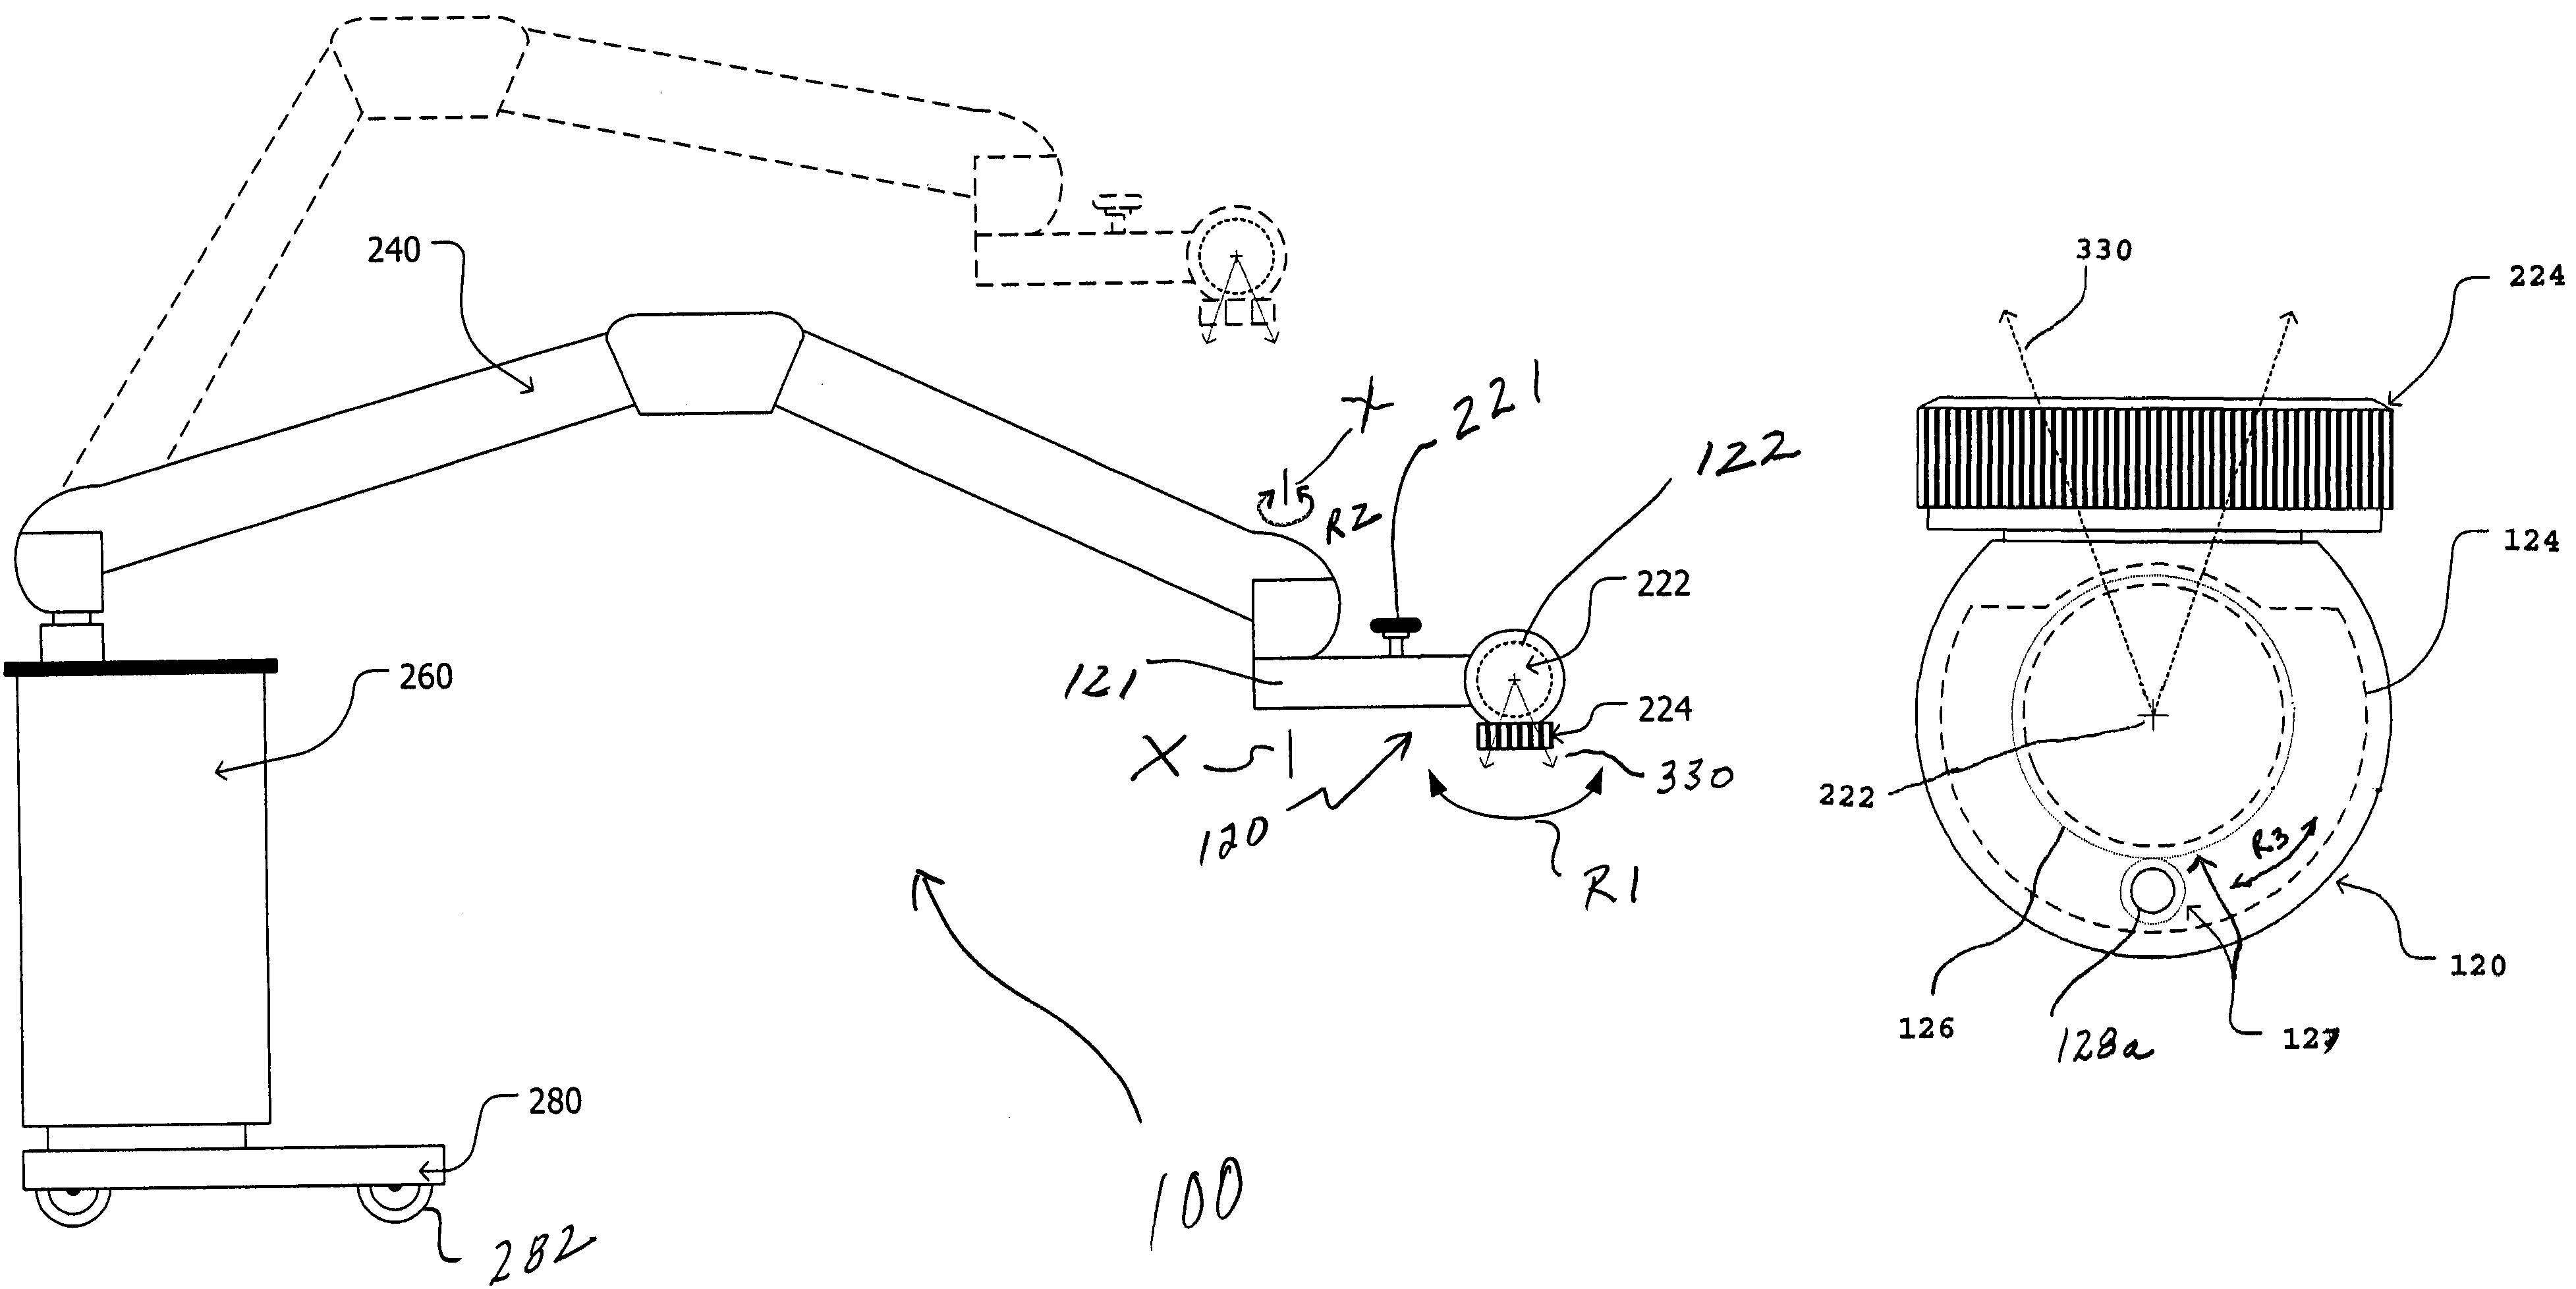 Radiation therapy system featuring rotatable filter assembly